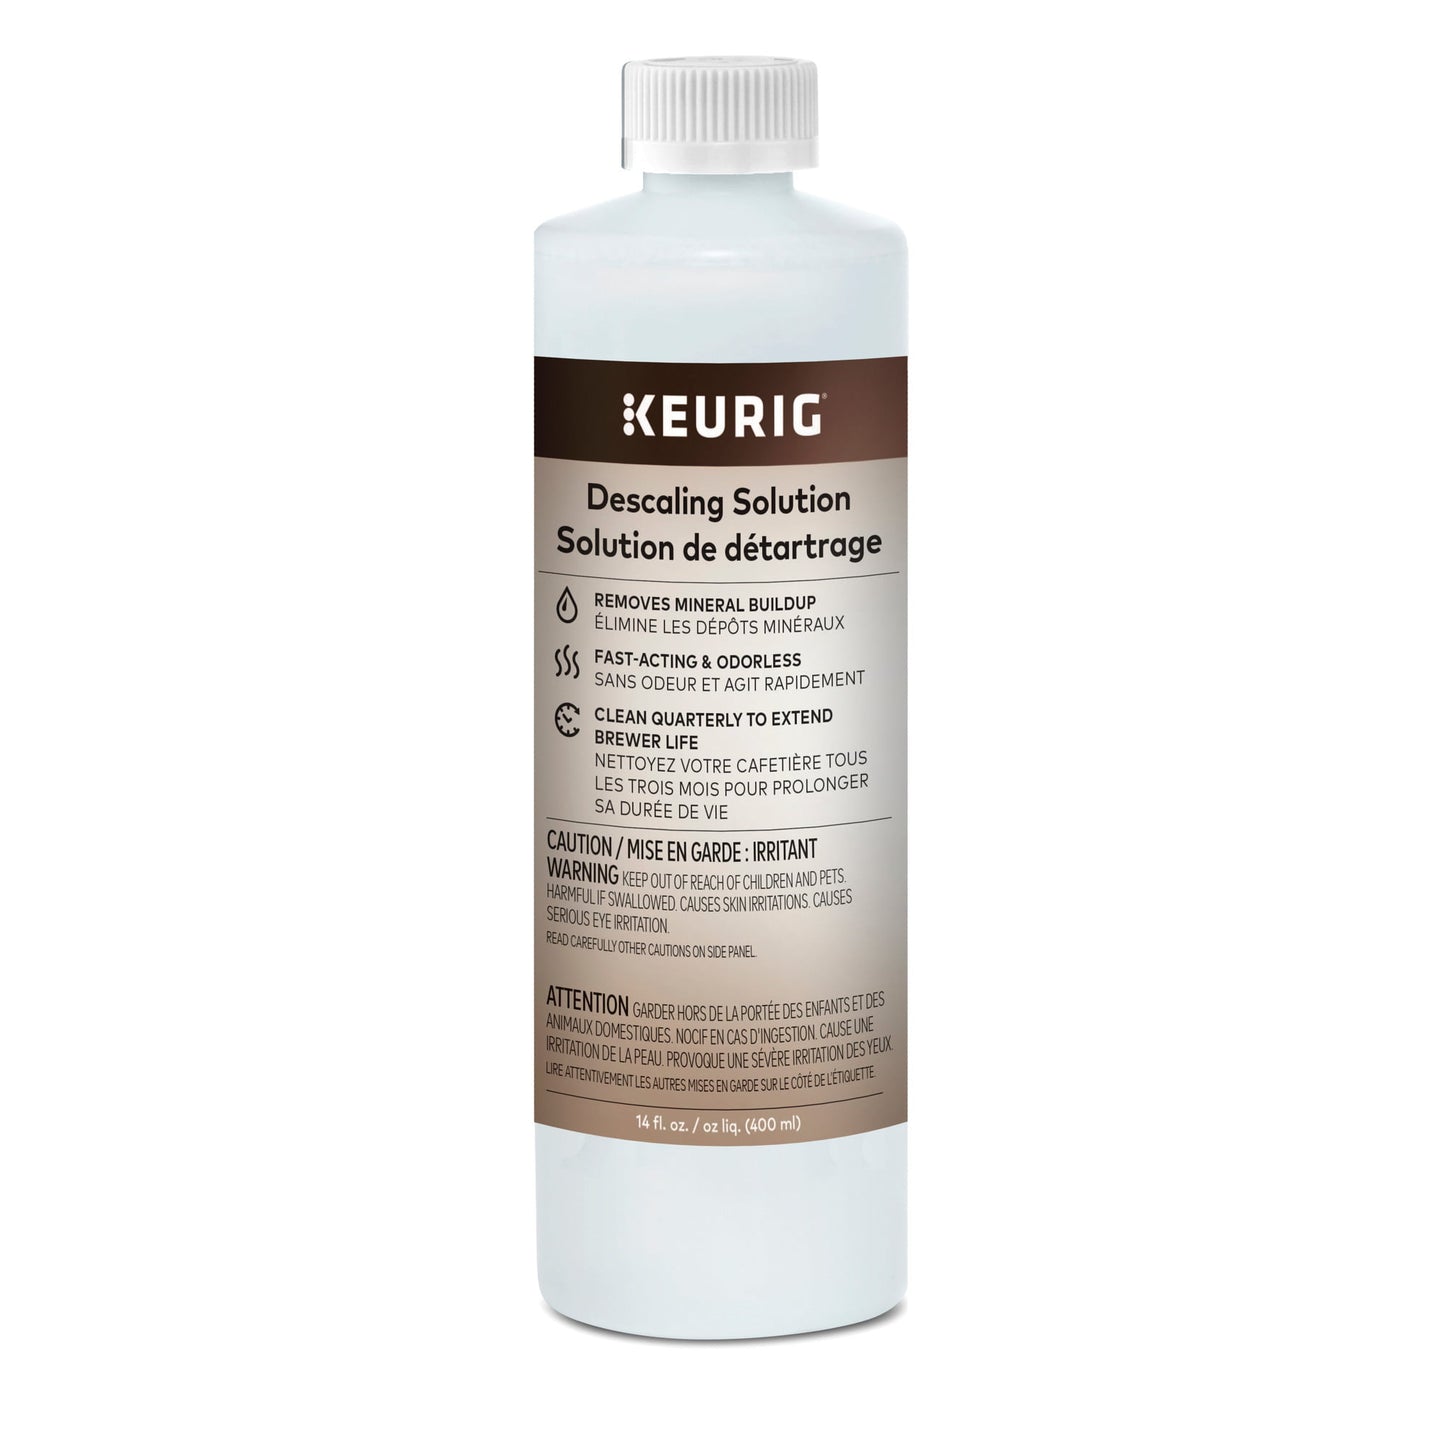 Keurig Descaling Solution For All Keurig 2.0 and 1.0 K-Cup Pod Coffee Makers